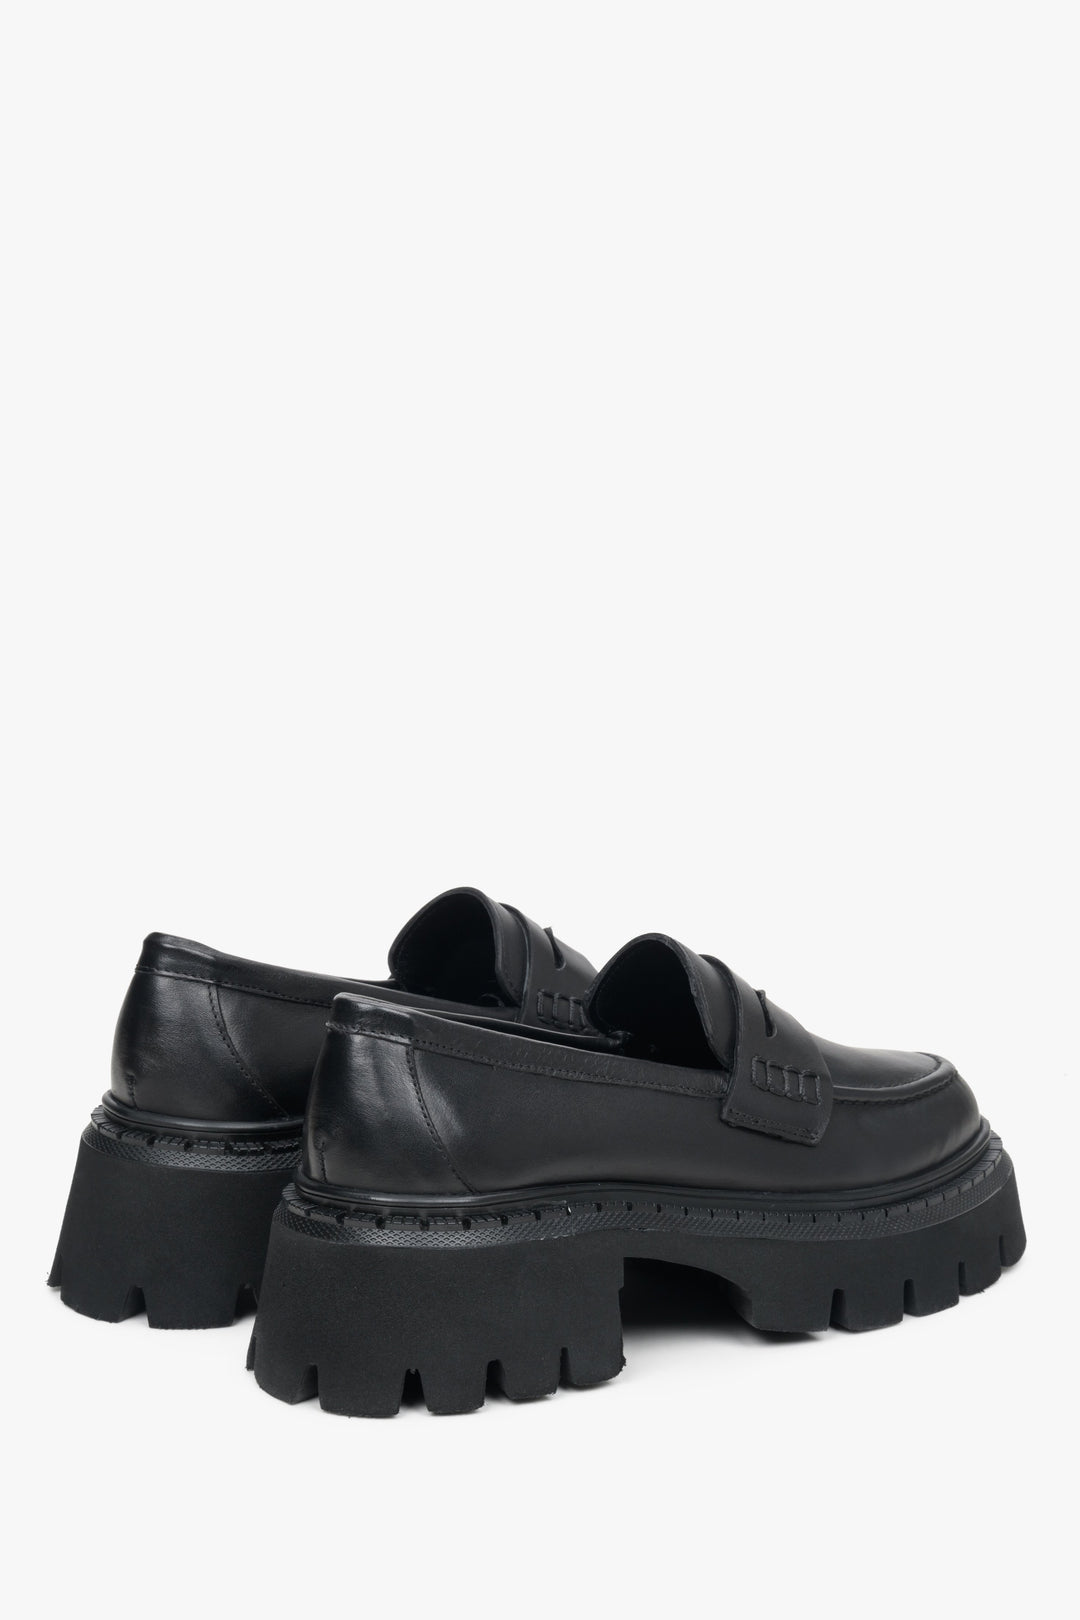 Women's black leather moccasins by Estro - close-up on the heel counter and side line.